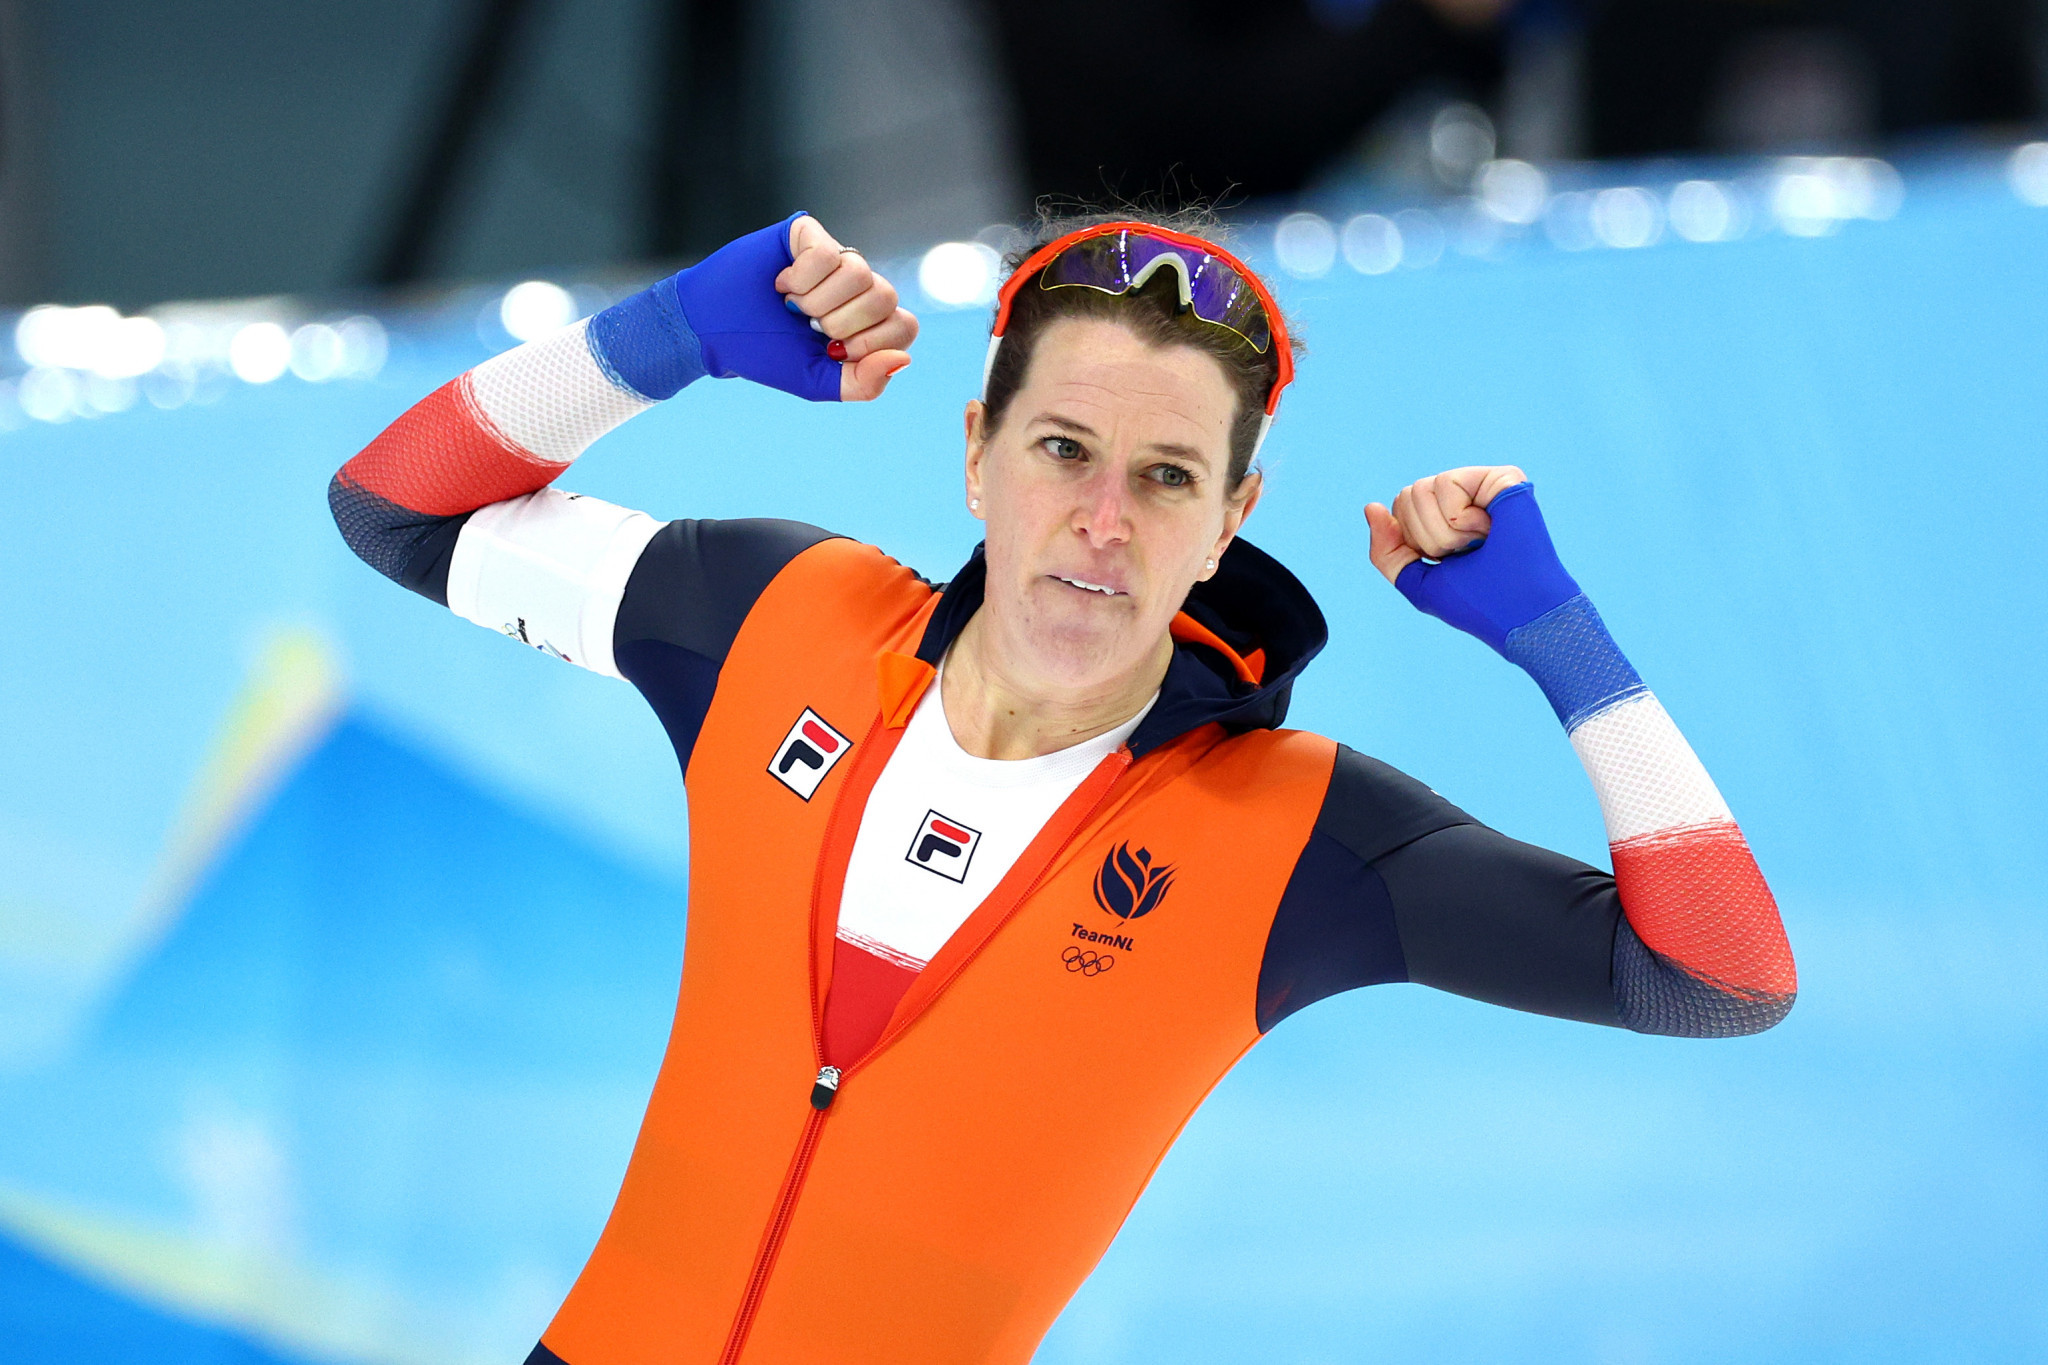 Record-breaking Dutch speed skater Ireen Wüst has won solo gold medals at five Olympics in a row ©Getty Images